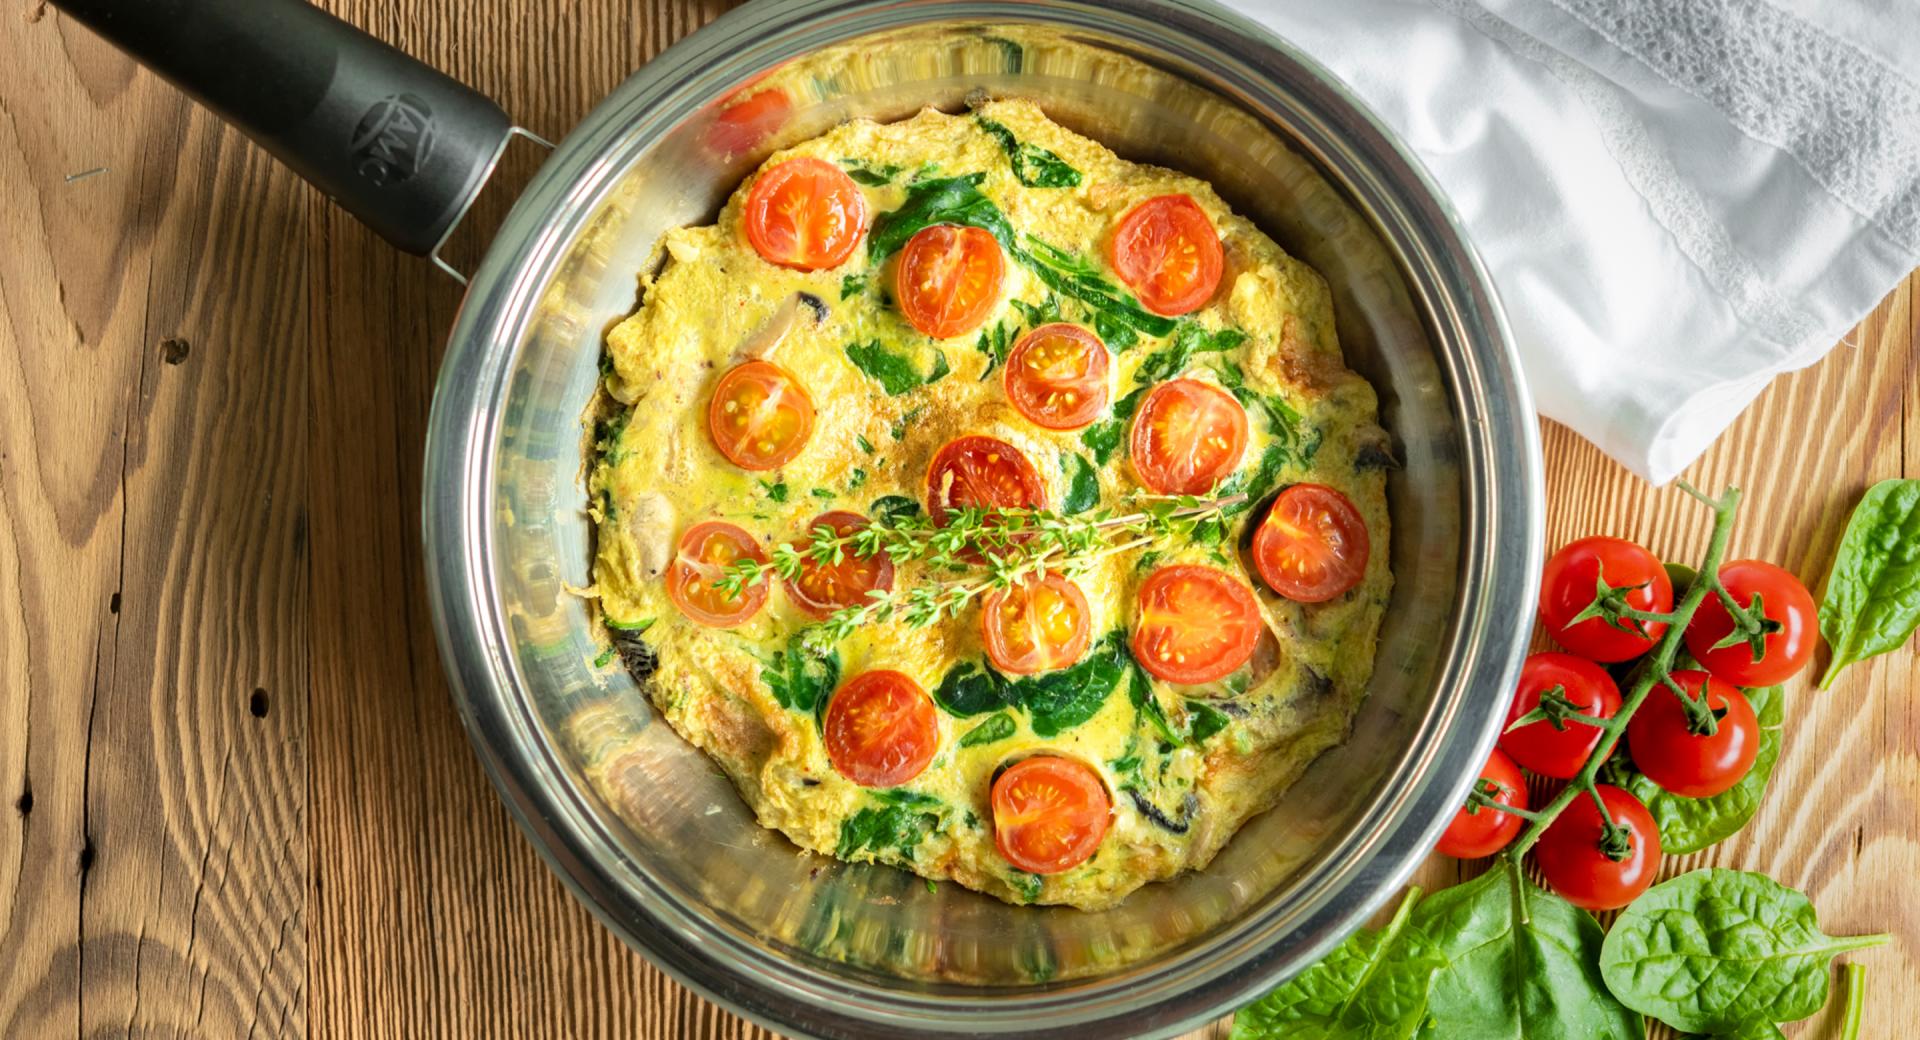 Farmer’s omelet with spinach